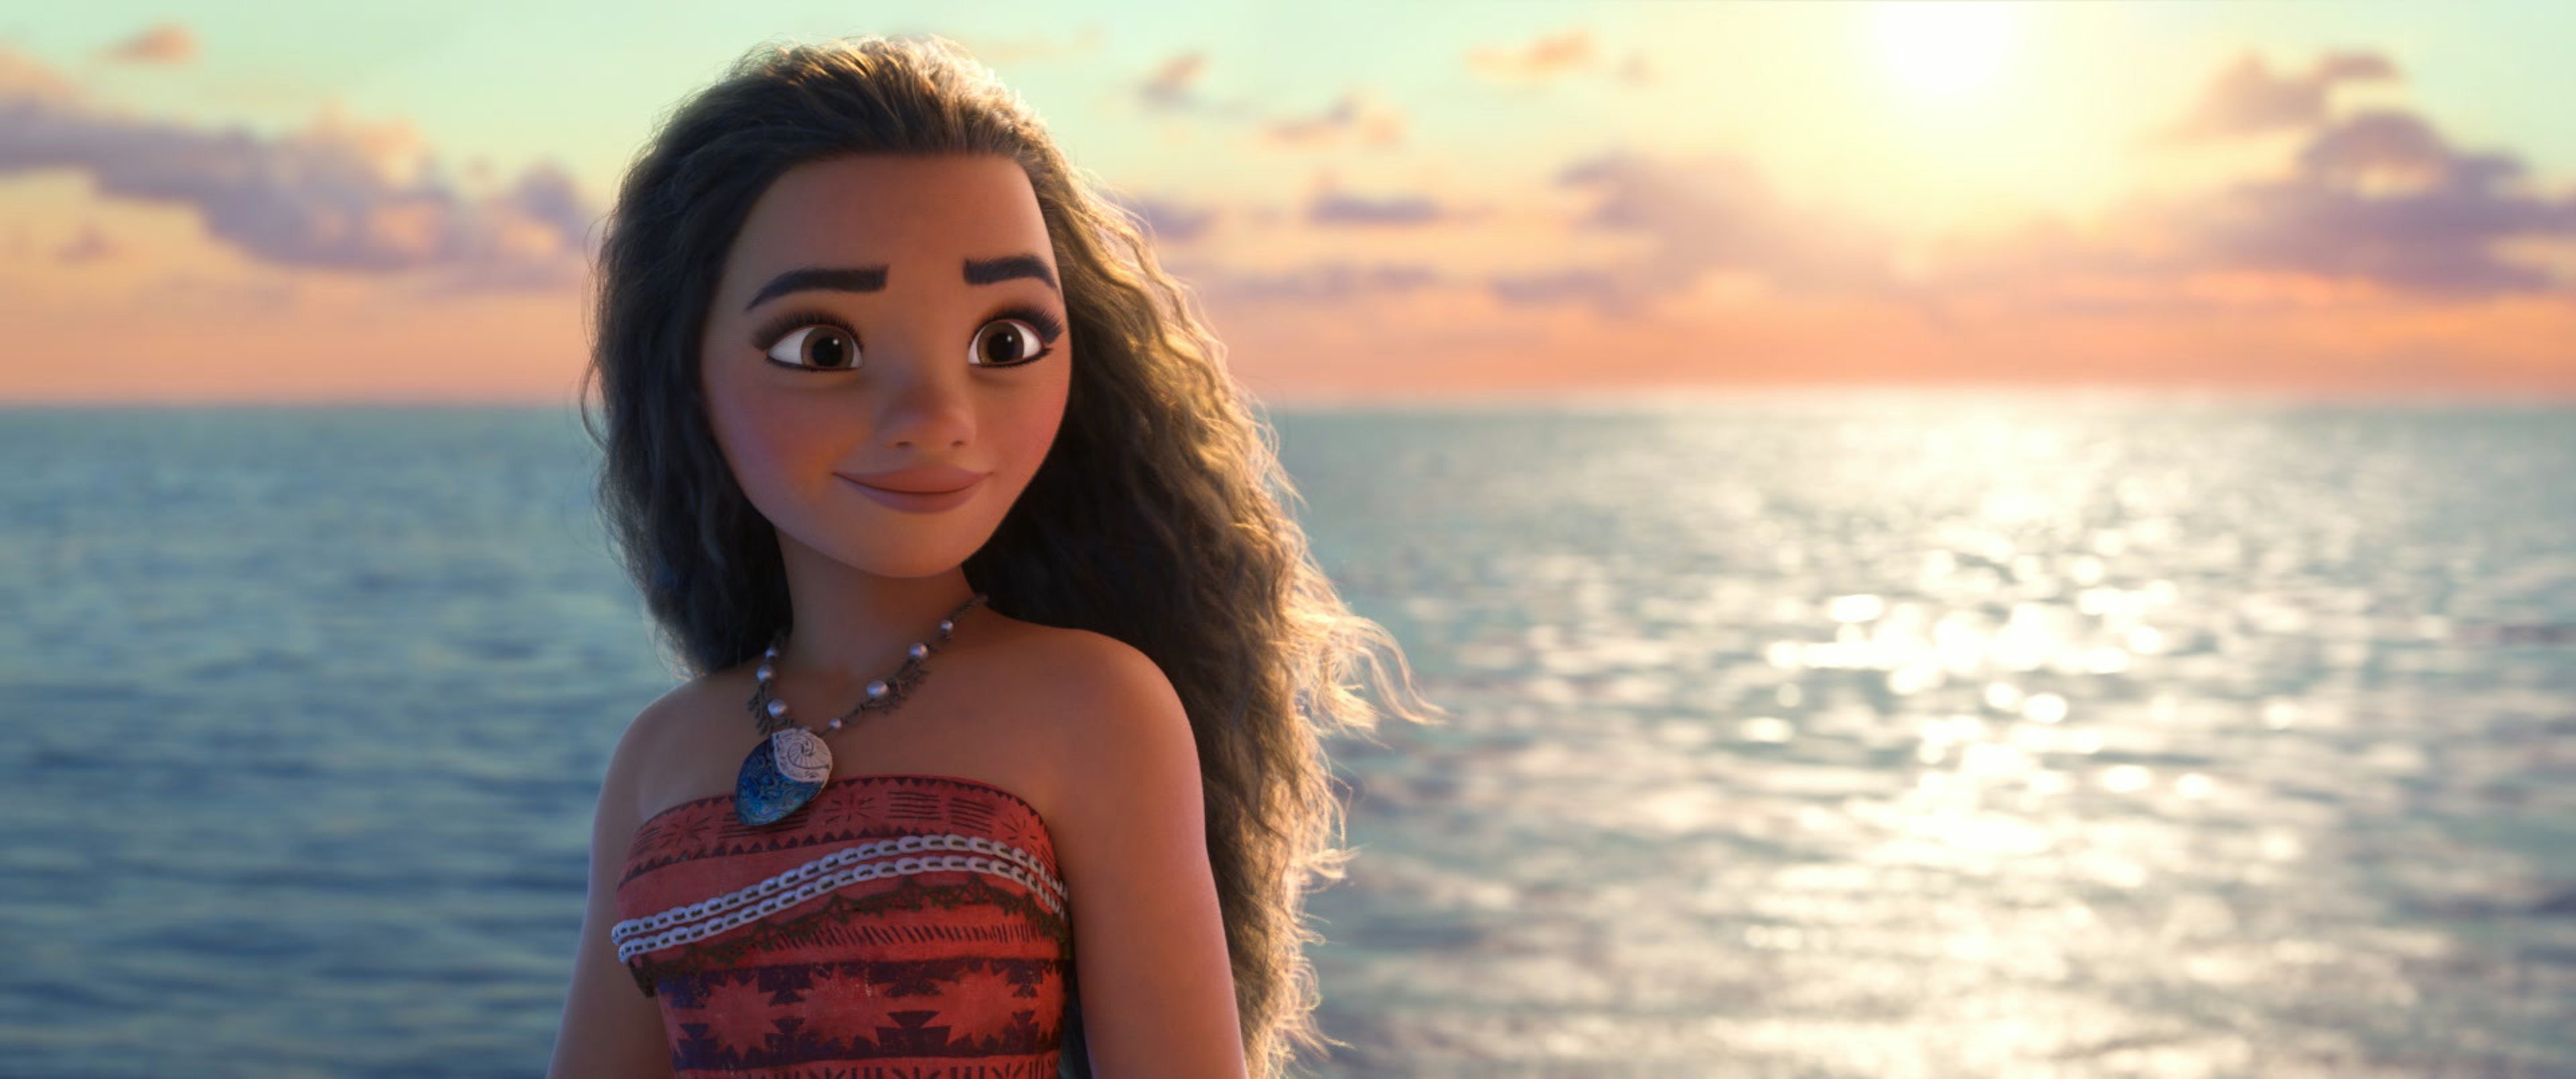 Moana Wallpapers, Pictures, Images